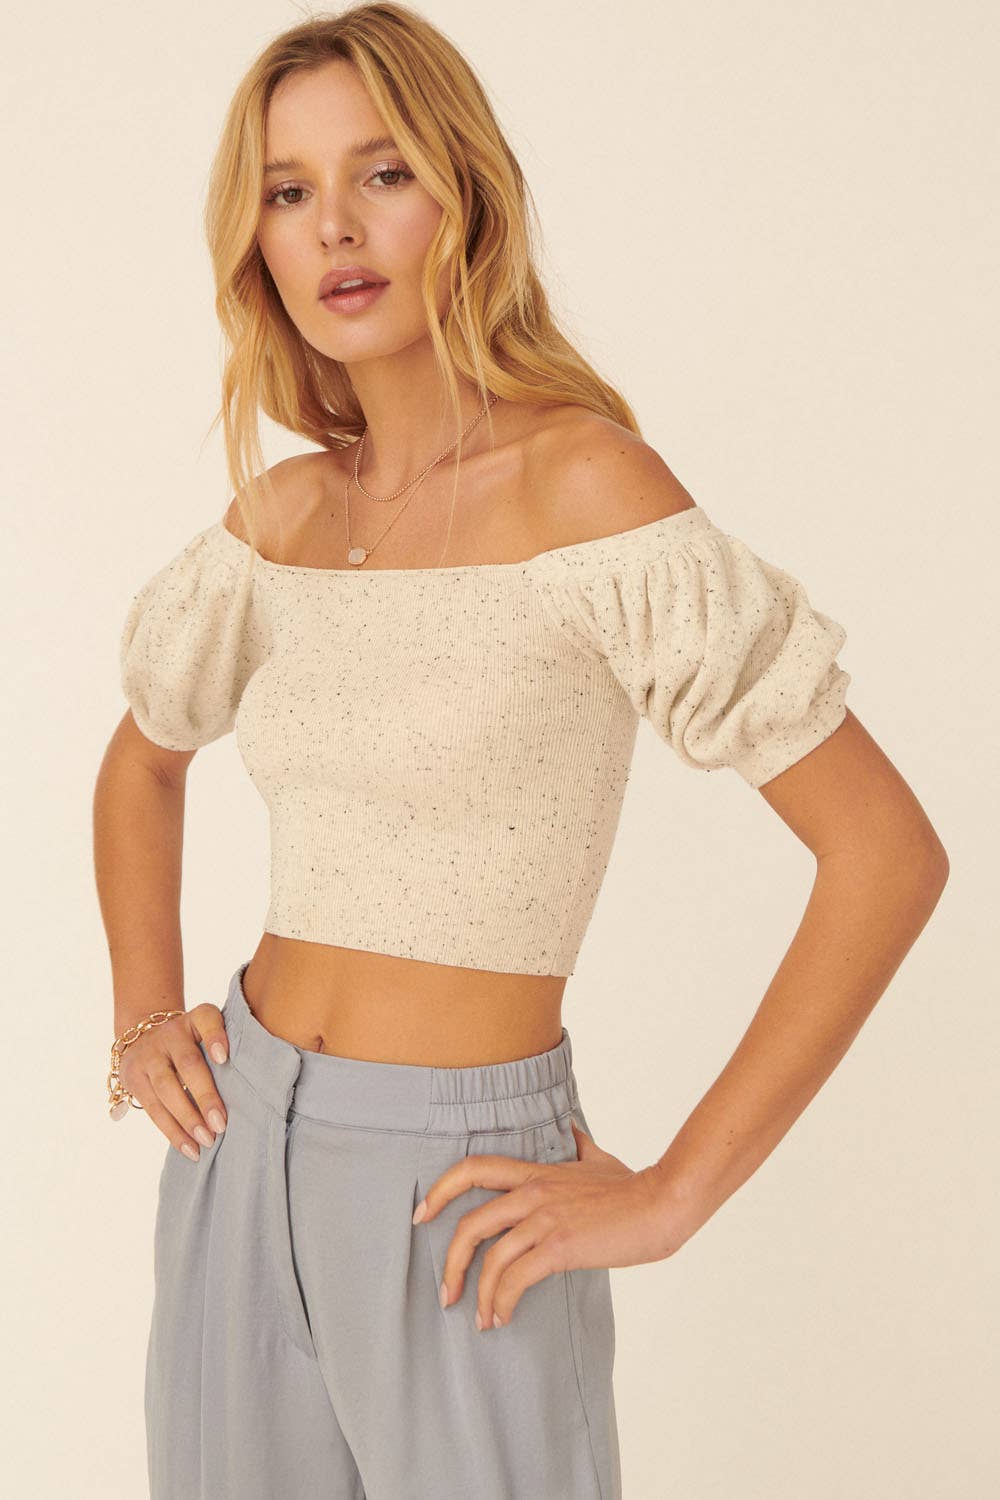 Addy Speckled Rib Knit Off Shoulder Puff Crop Sweater - Sweater Crop Top - essecoco